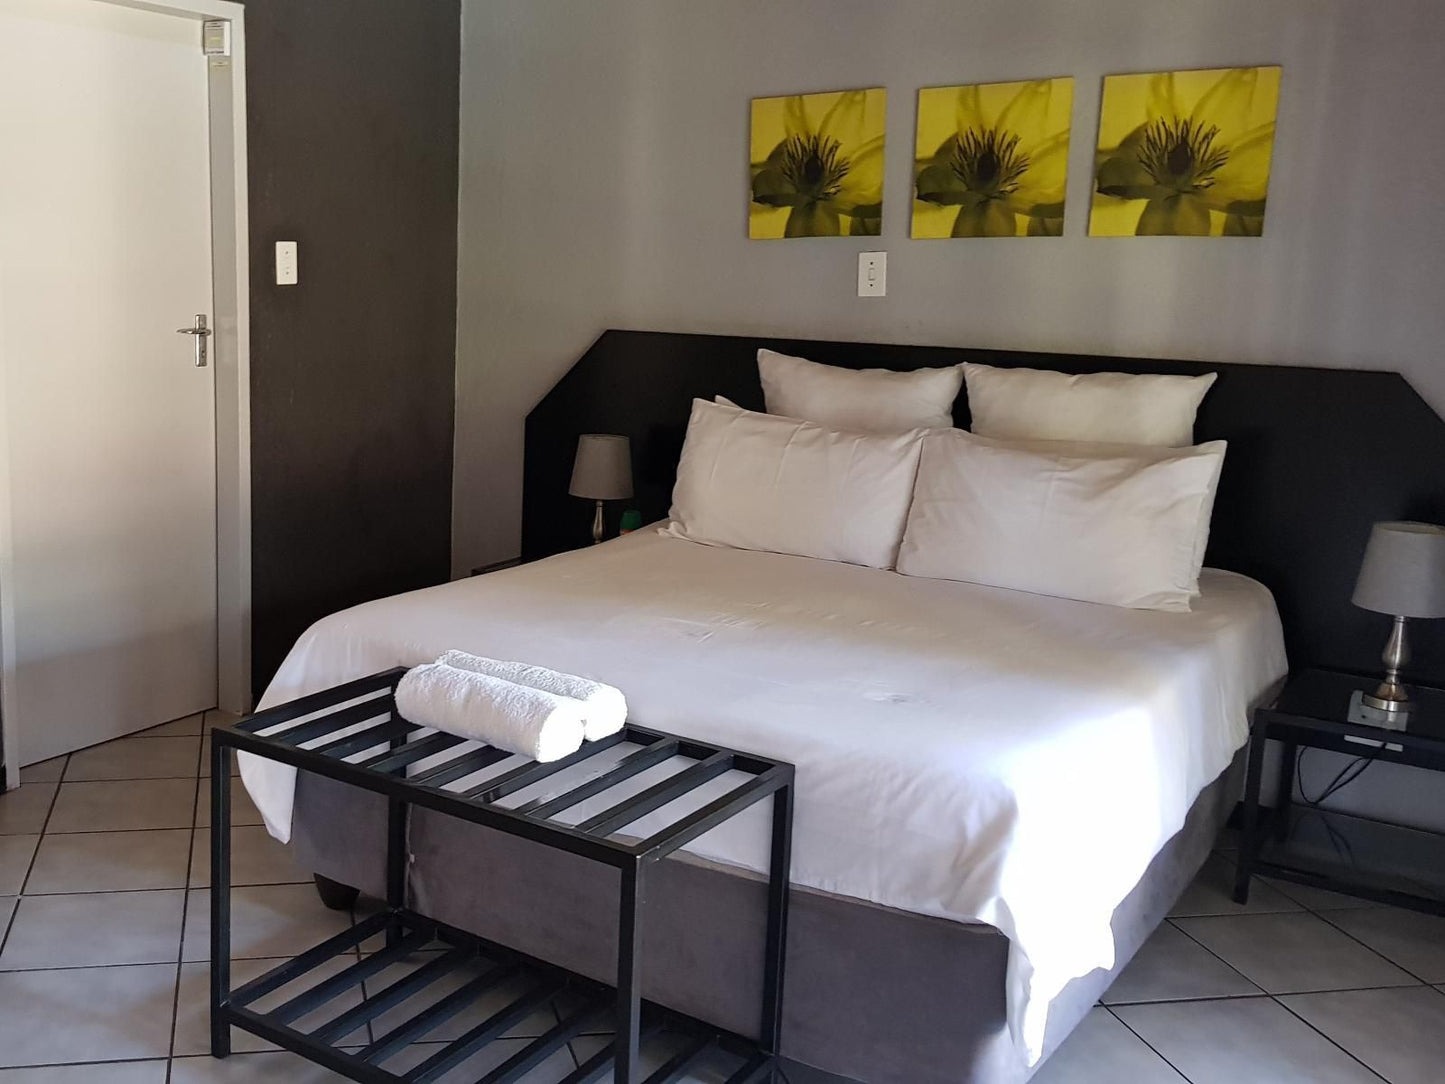 Siesta Guest House Musina Musina Messina Limpopo Province South Africa Unsaturated, Bedroom